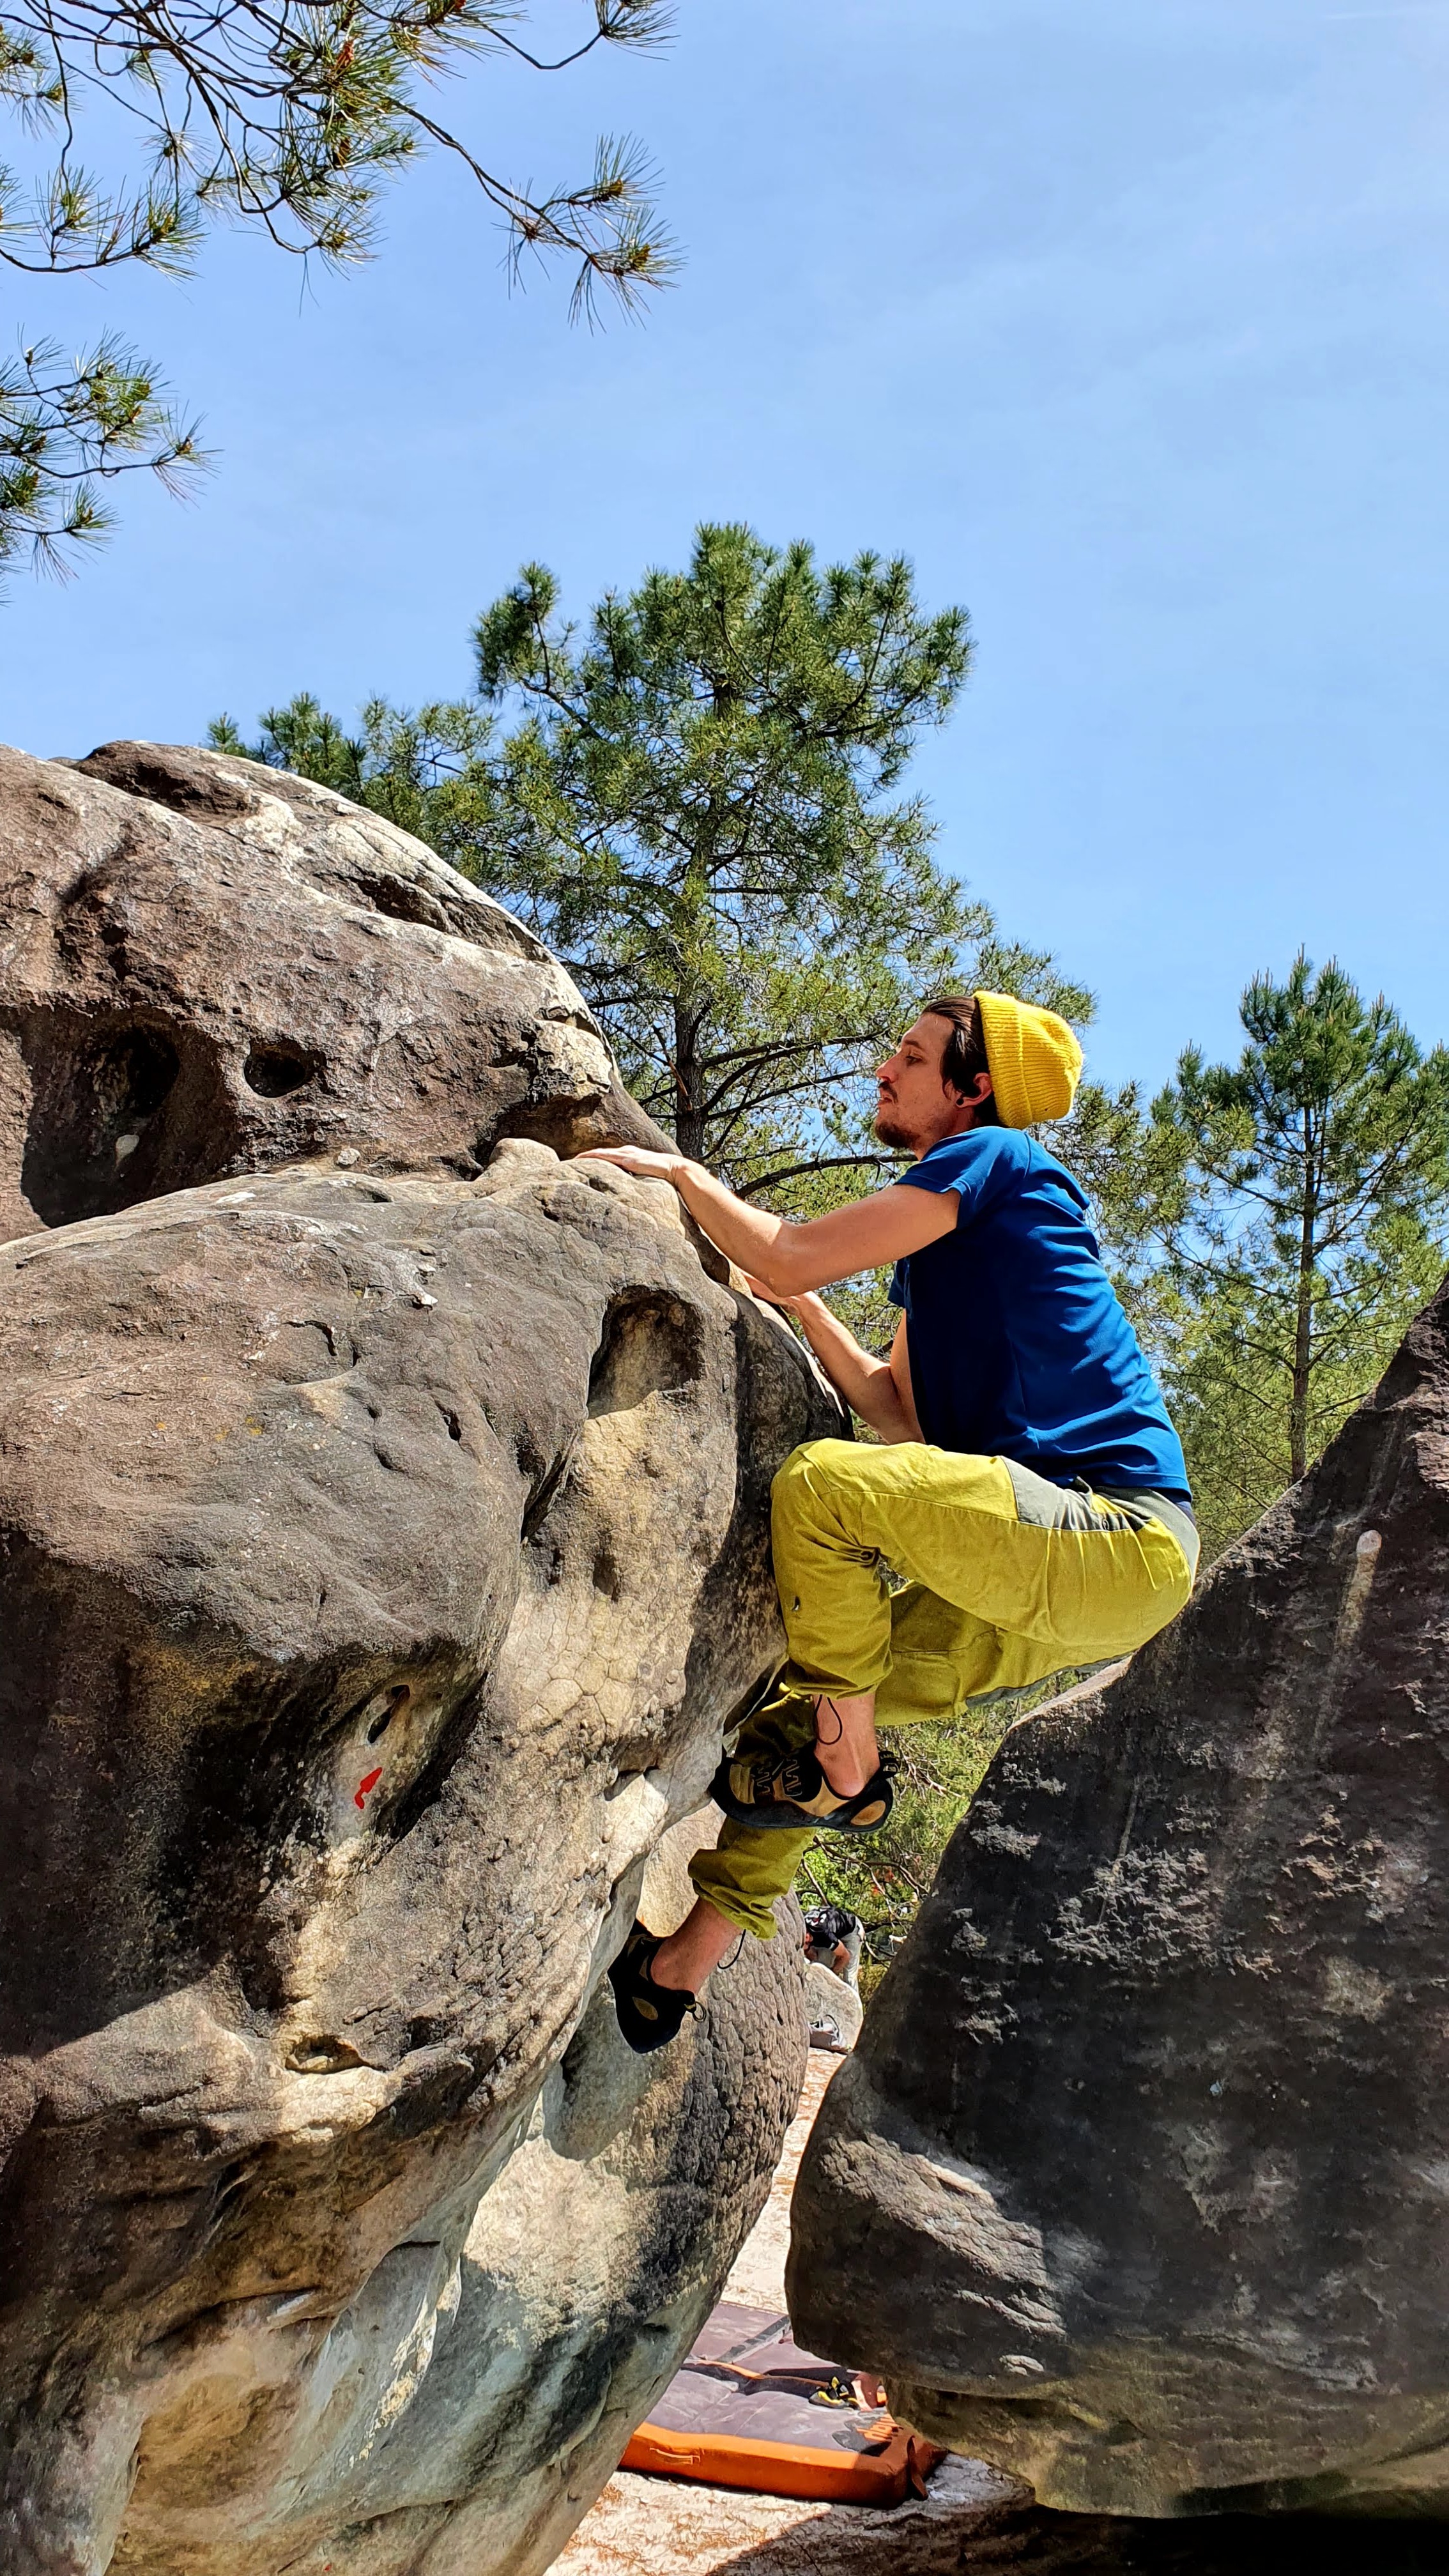 A person topping out on a boulder with trees in the backgroun